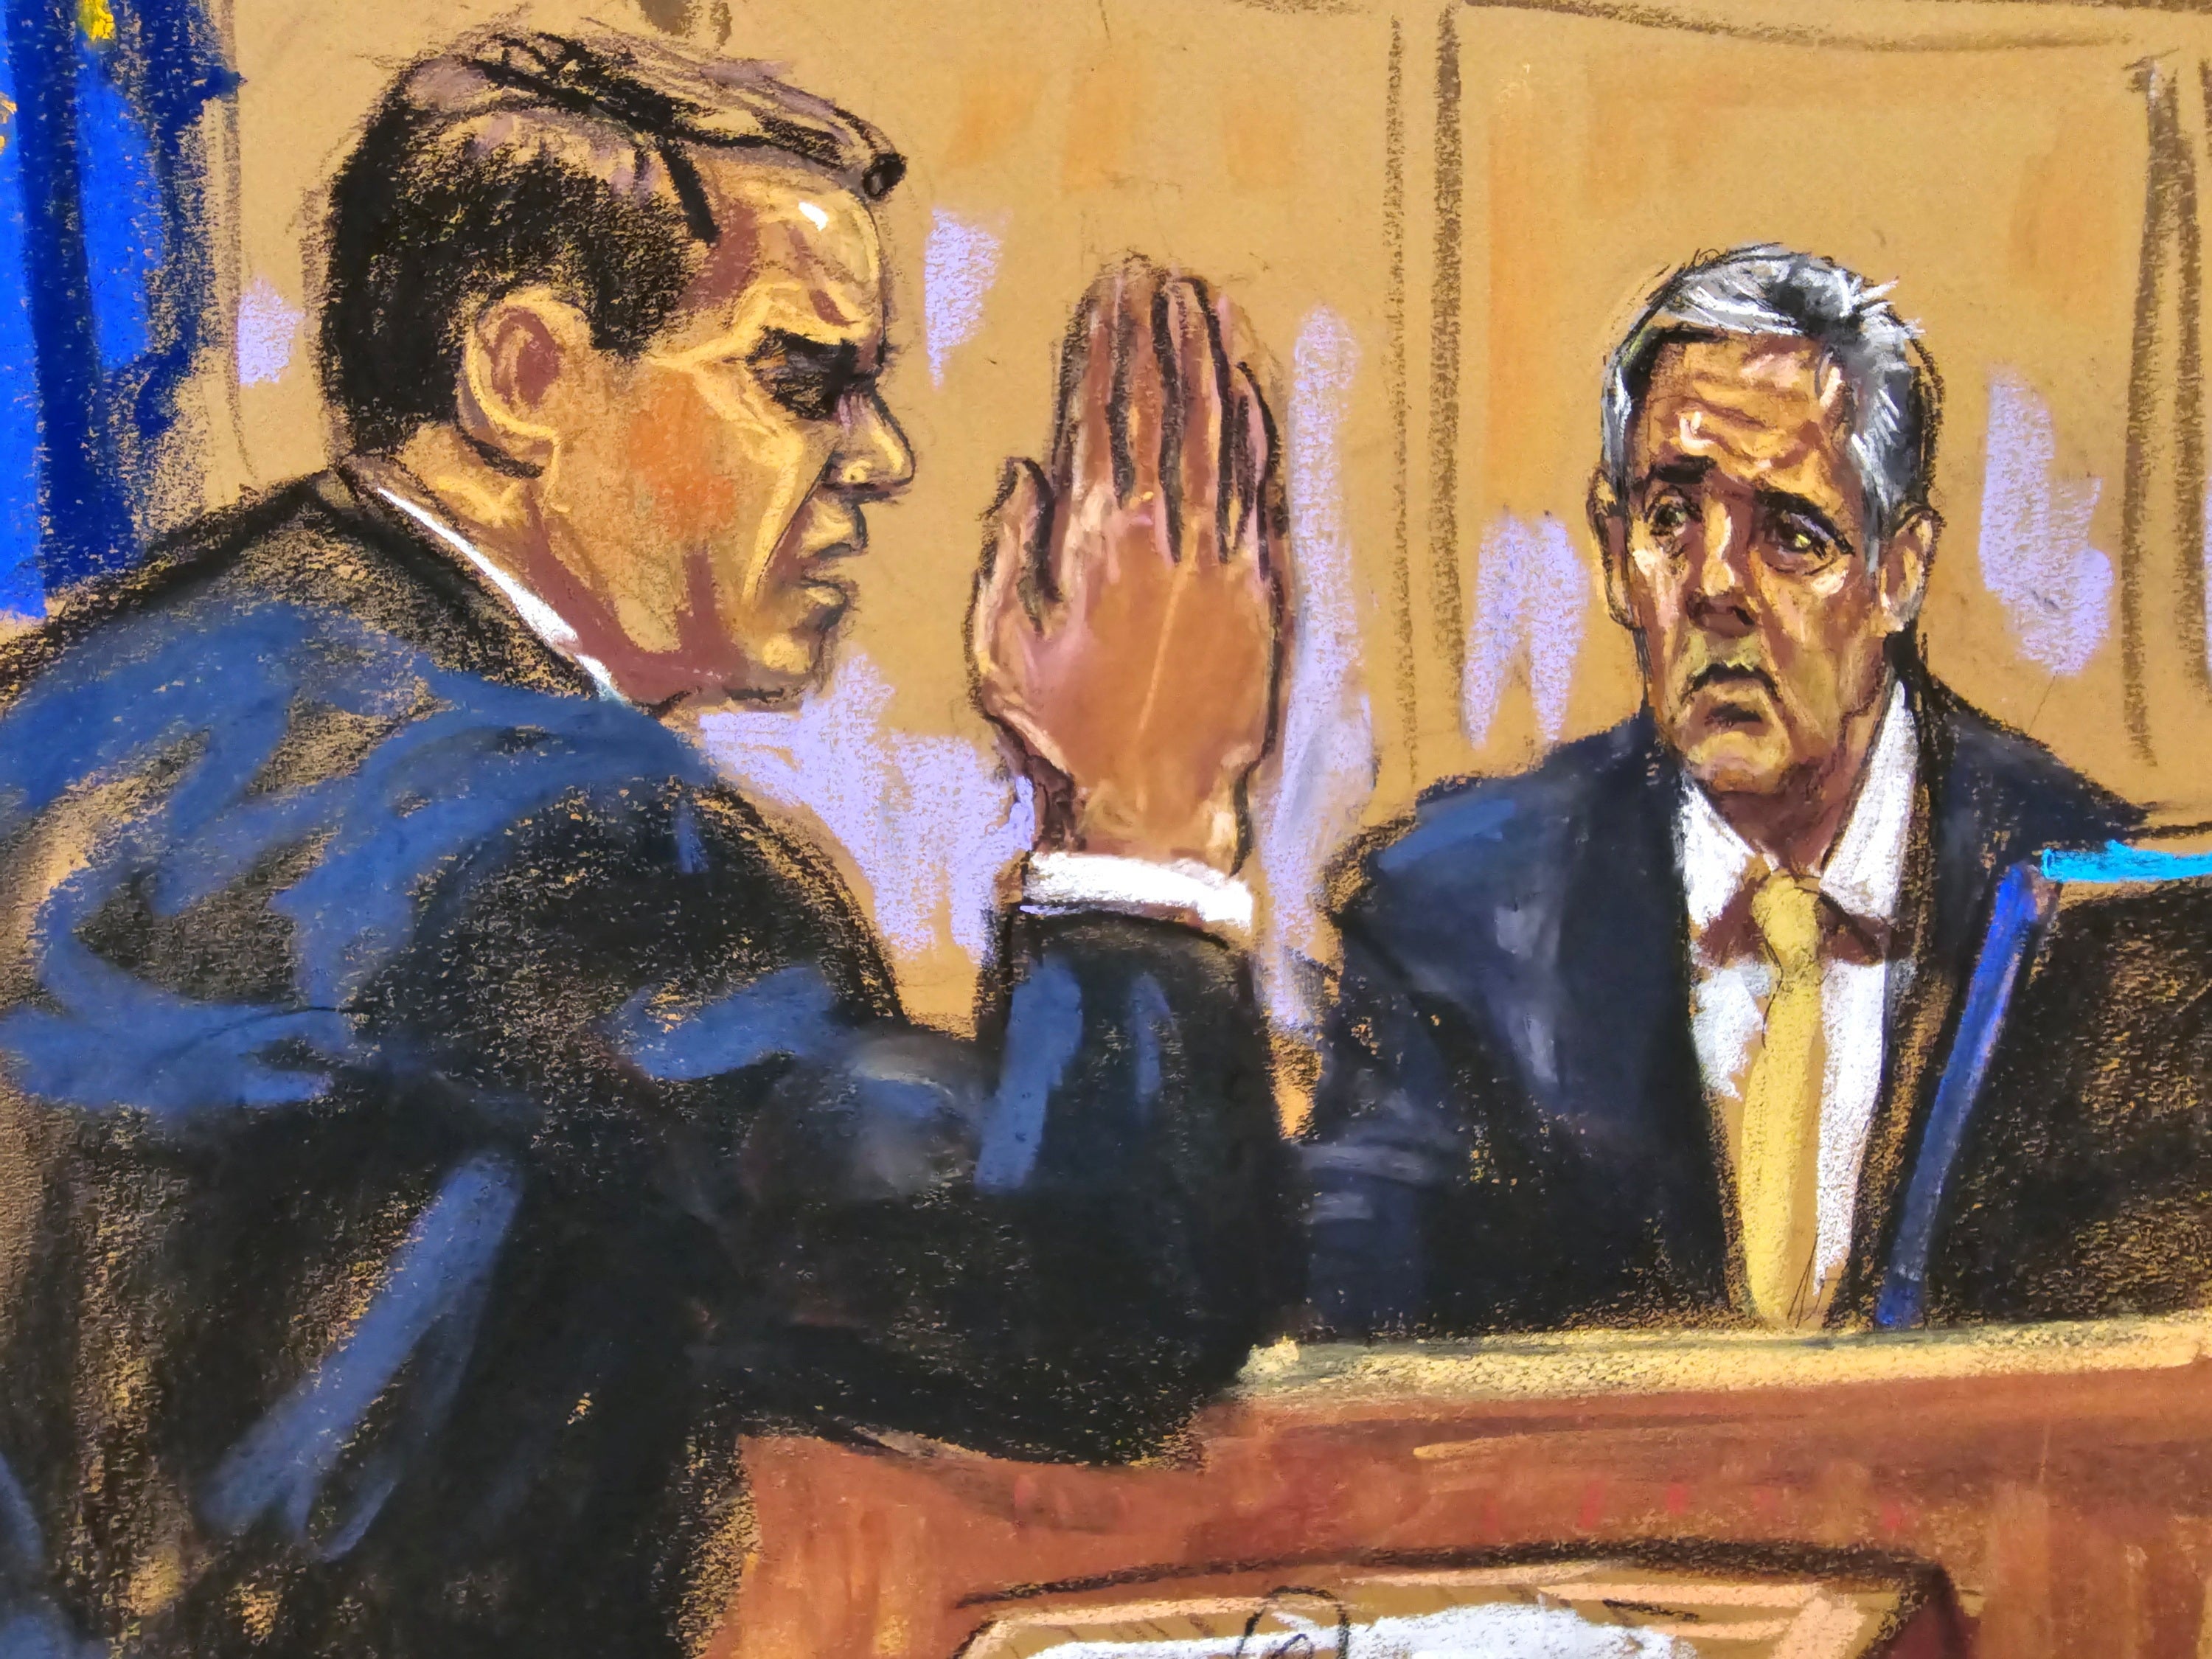 Mr Blanche accuses Cohen of lying in a heated moment from the second day of his cross-examination